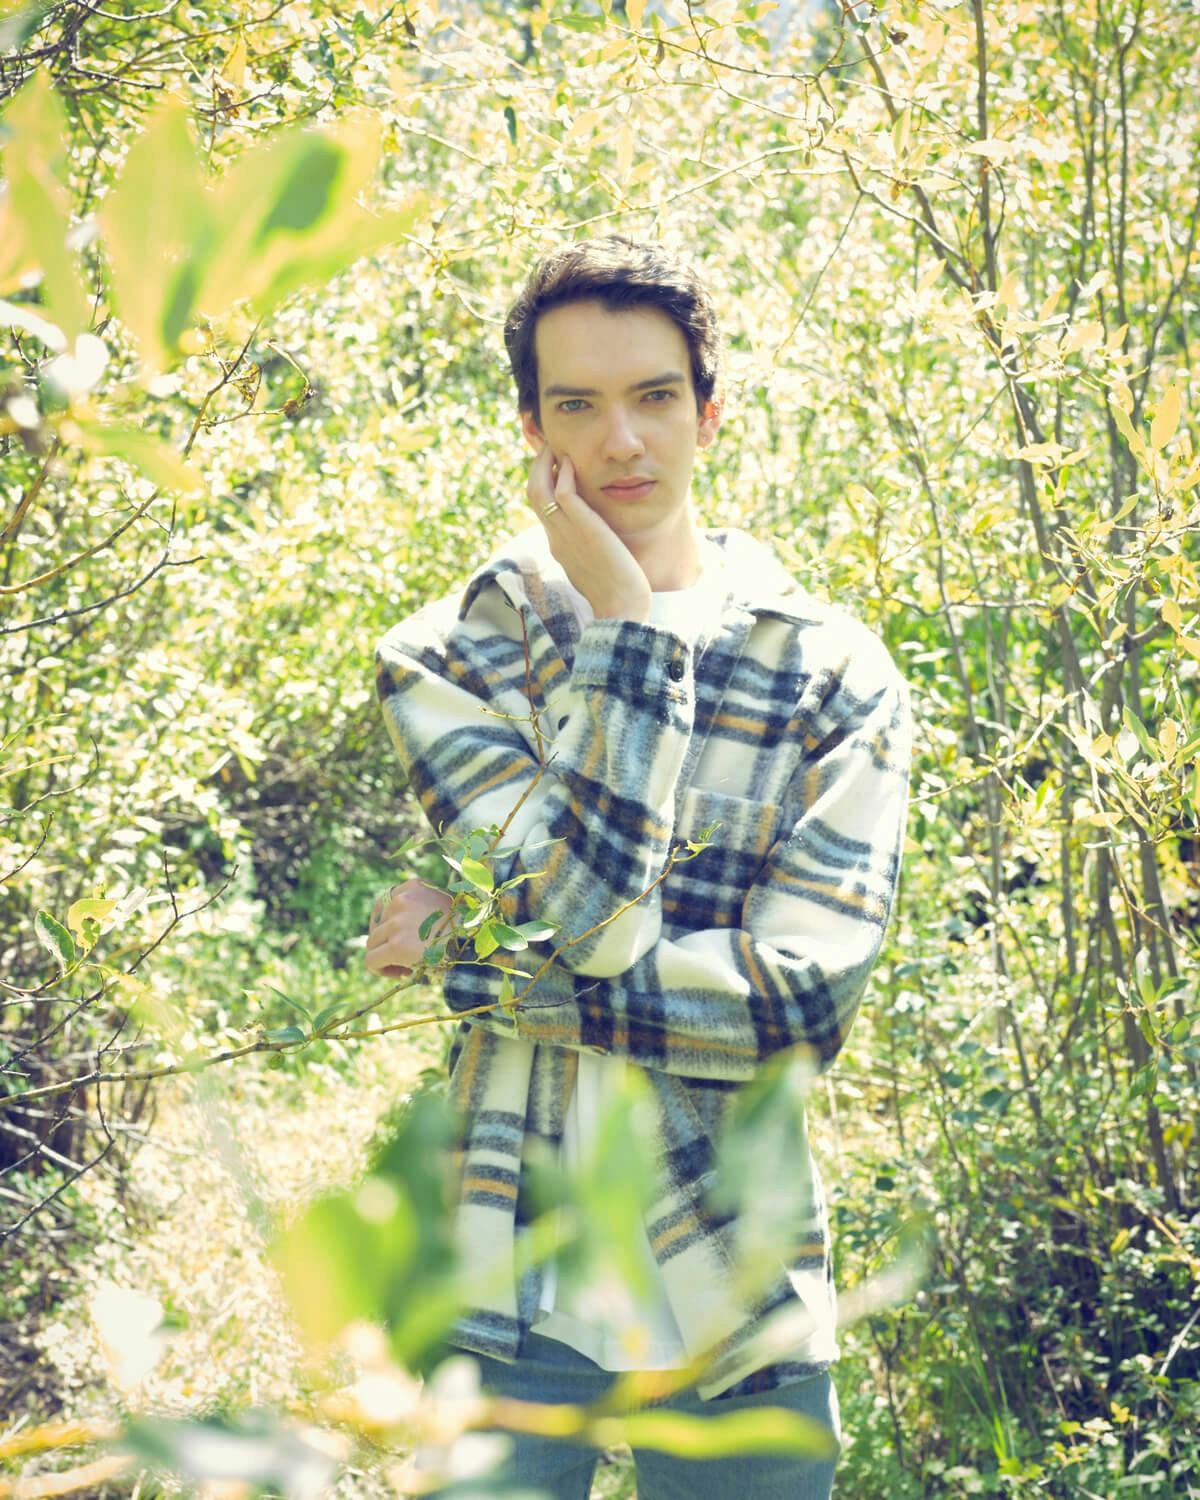 Kodi Smit-McPhee in a double-breasted blazer, blouse, jeans and boots in the woods of the Colorado mountains at the Telluride Film Festival, 2021.